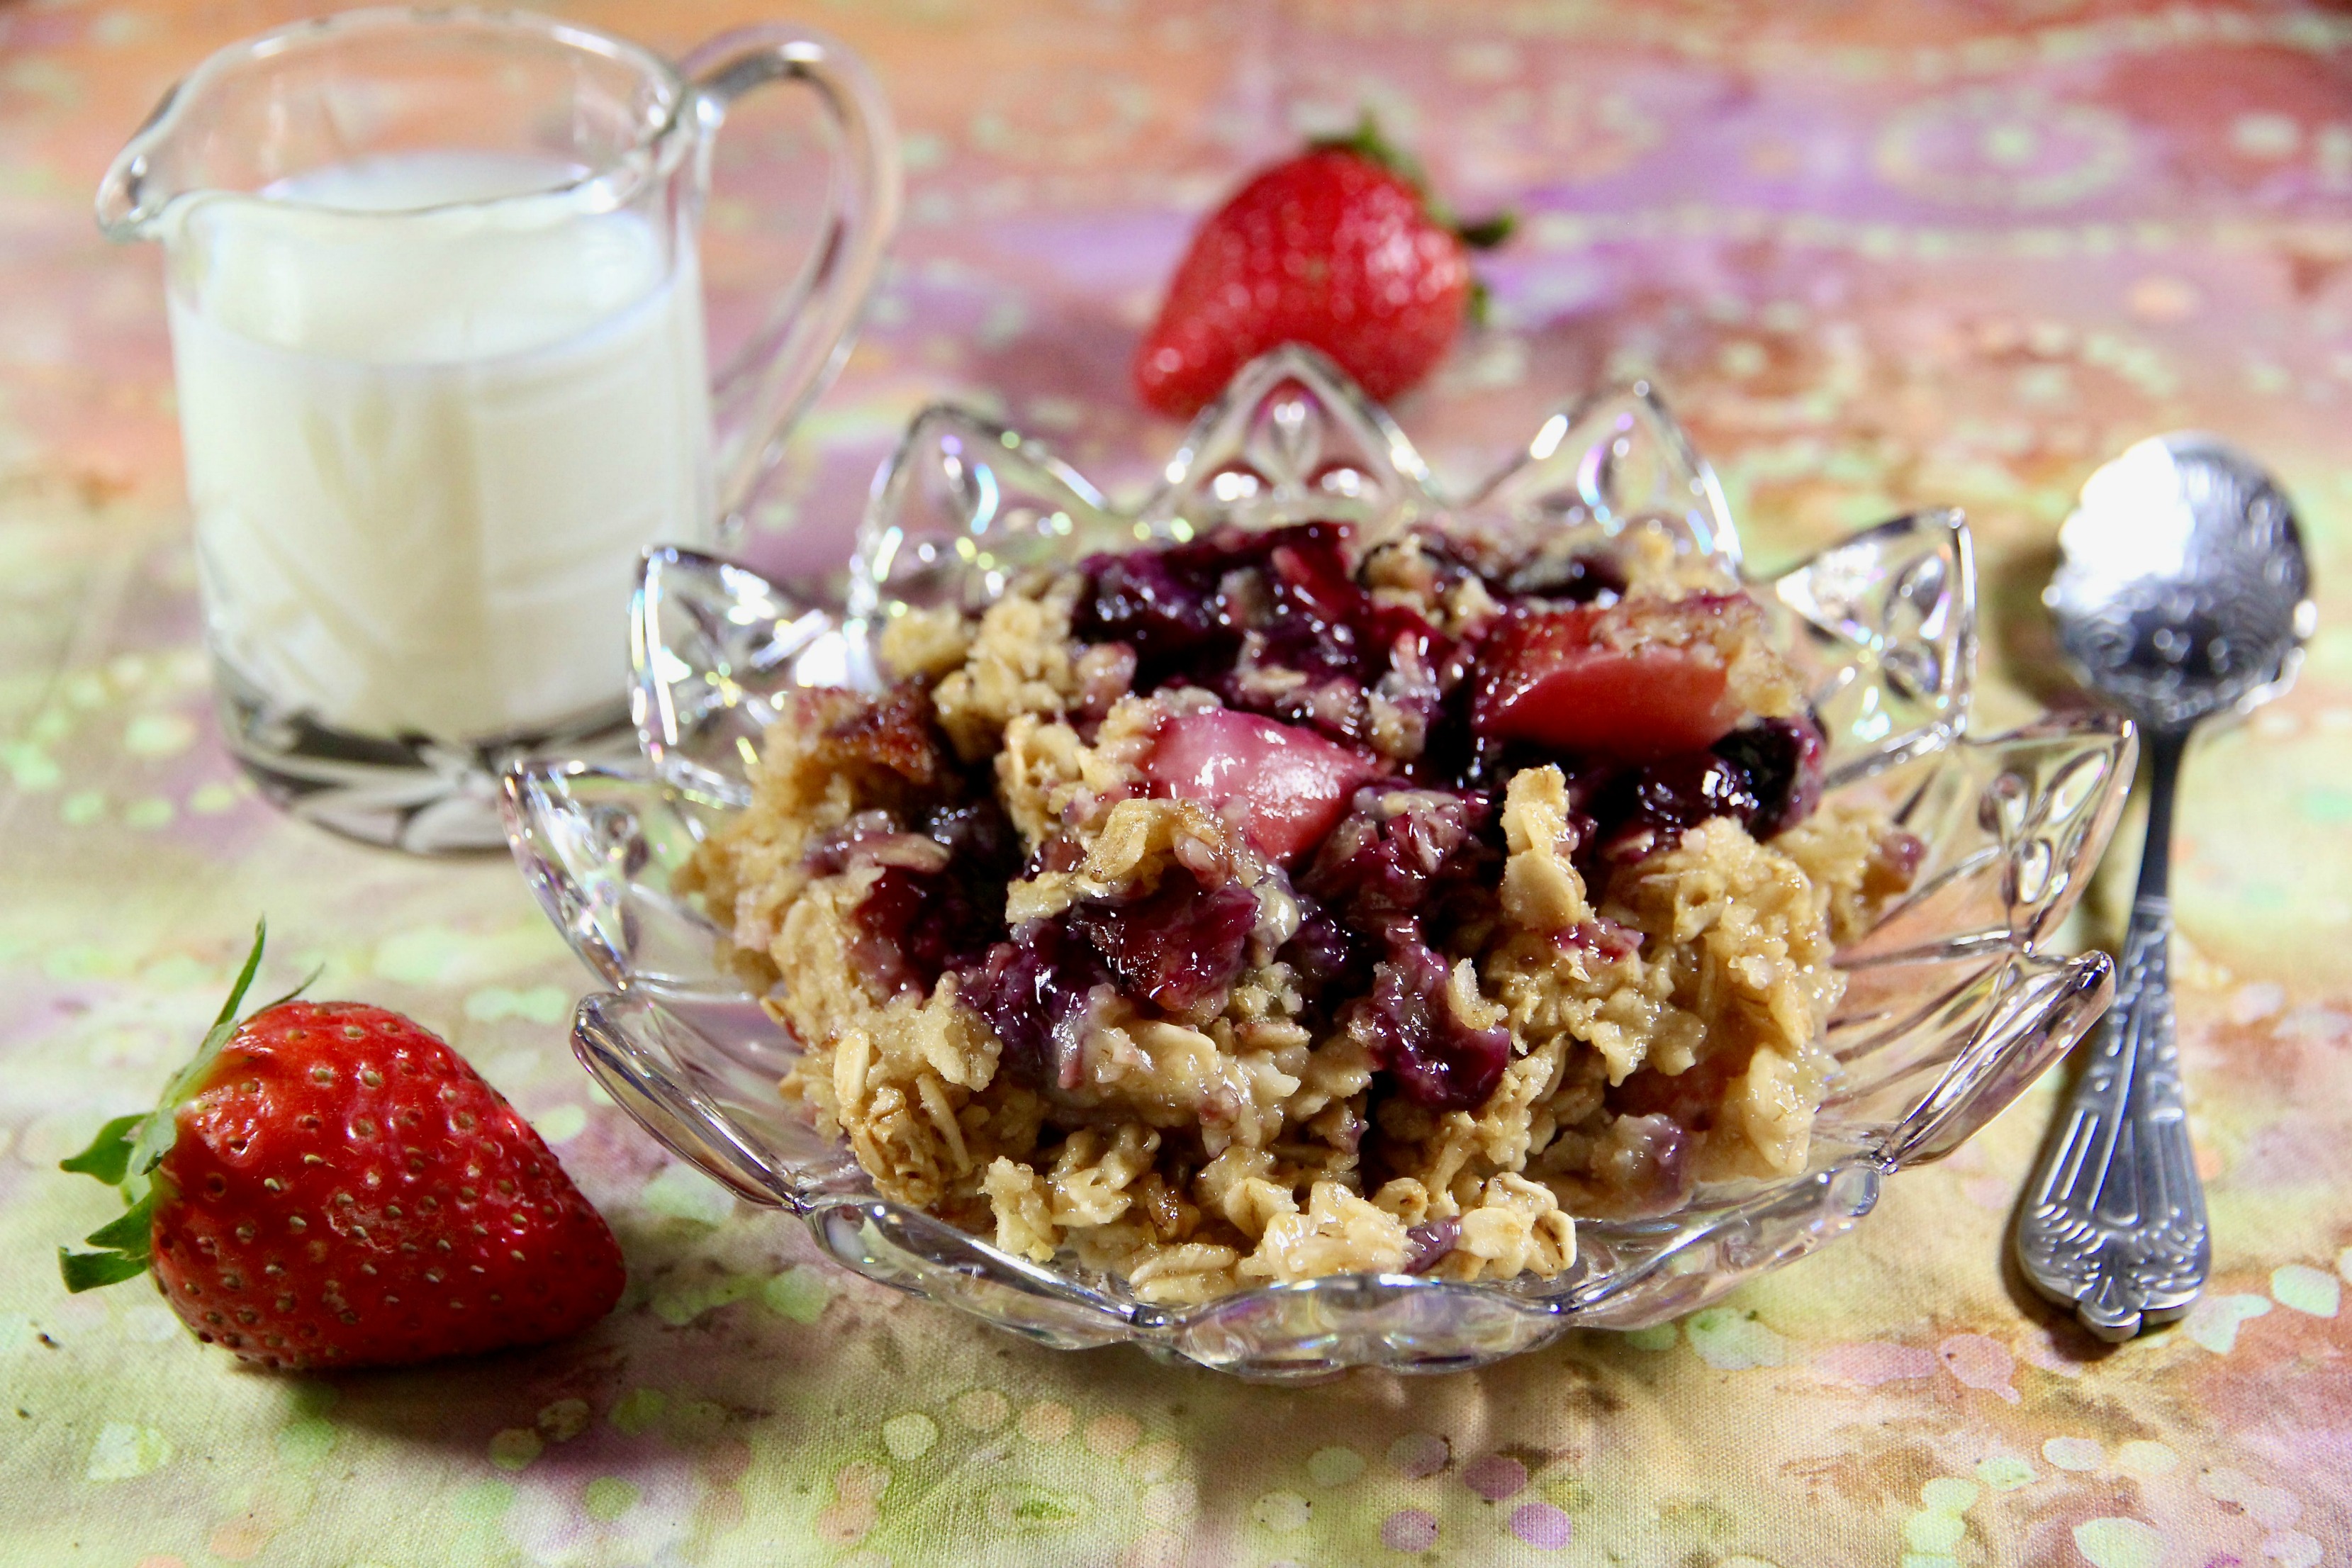 Amish Blackberry and Strawberry Baked Oatmeal